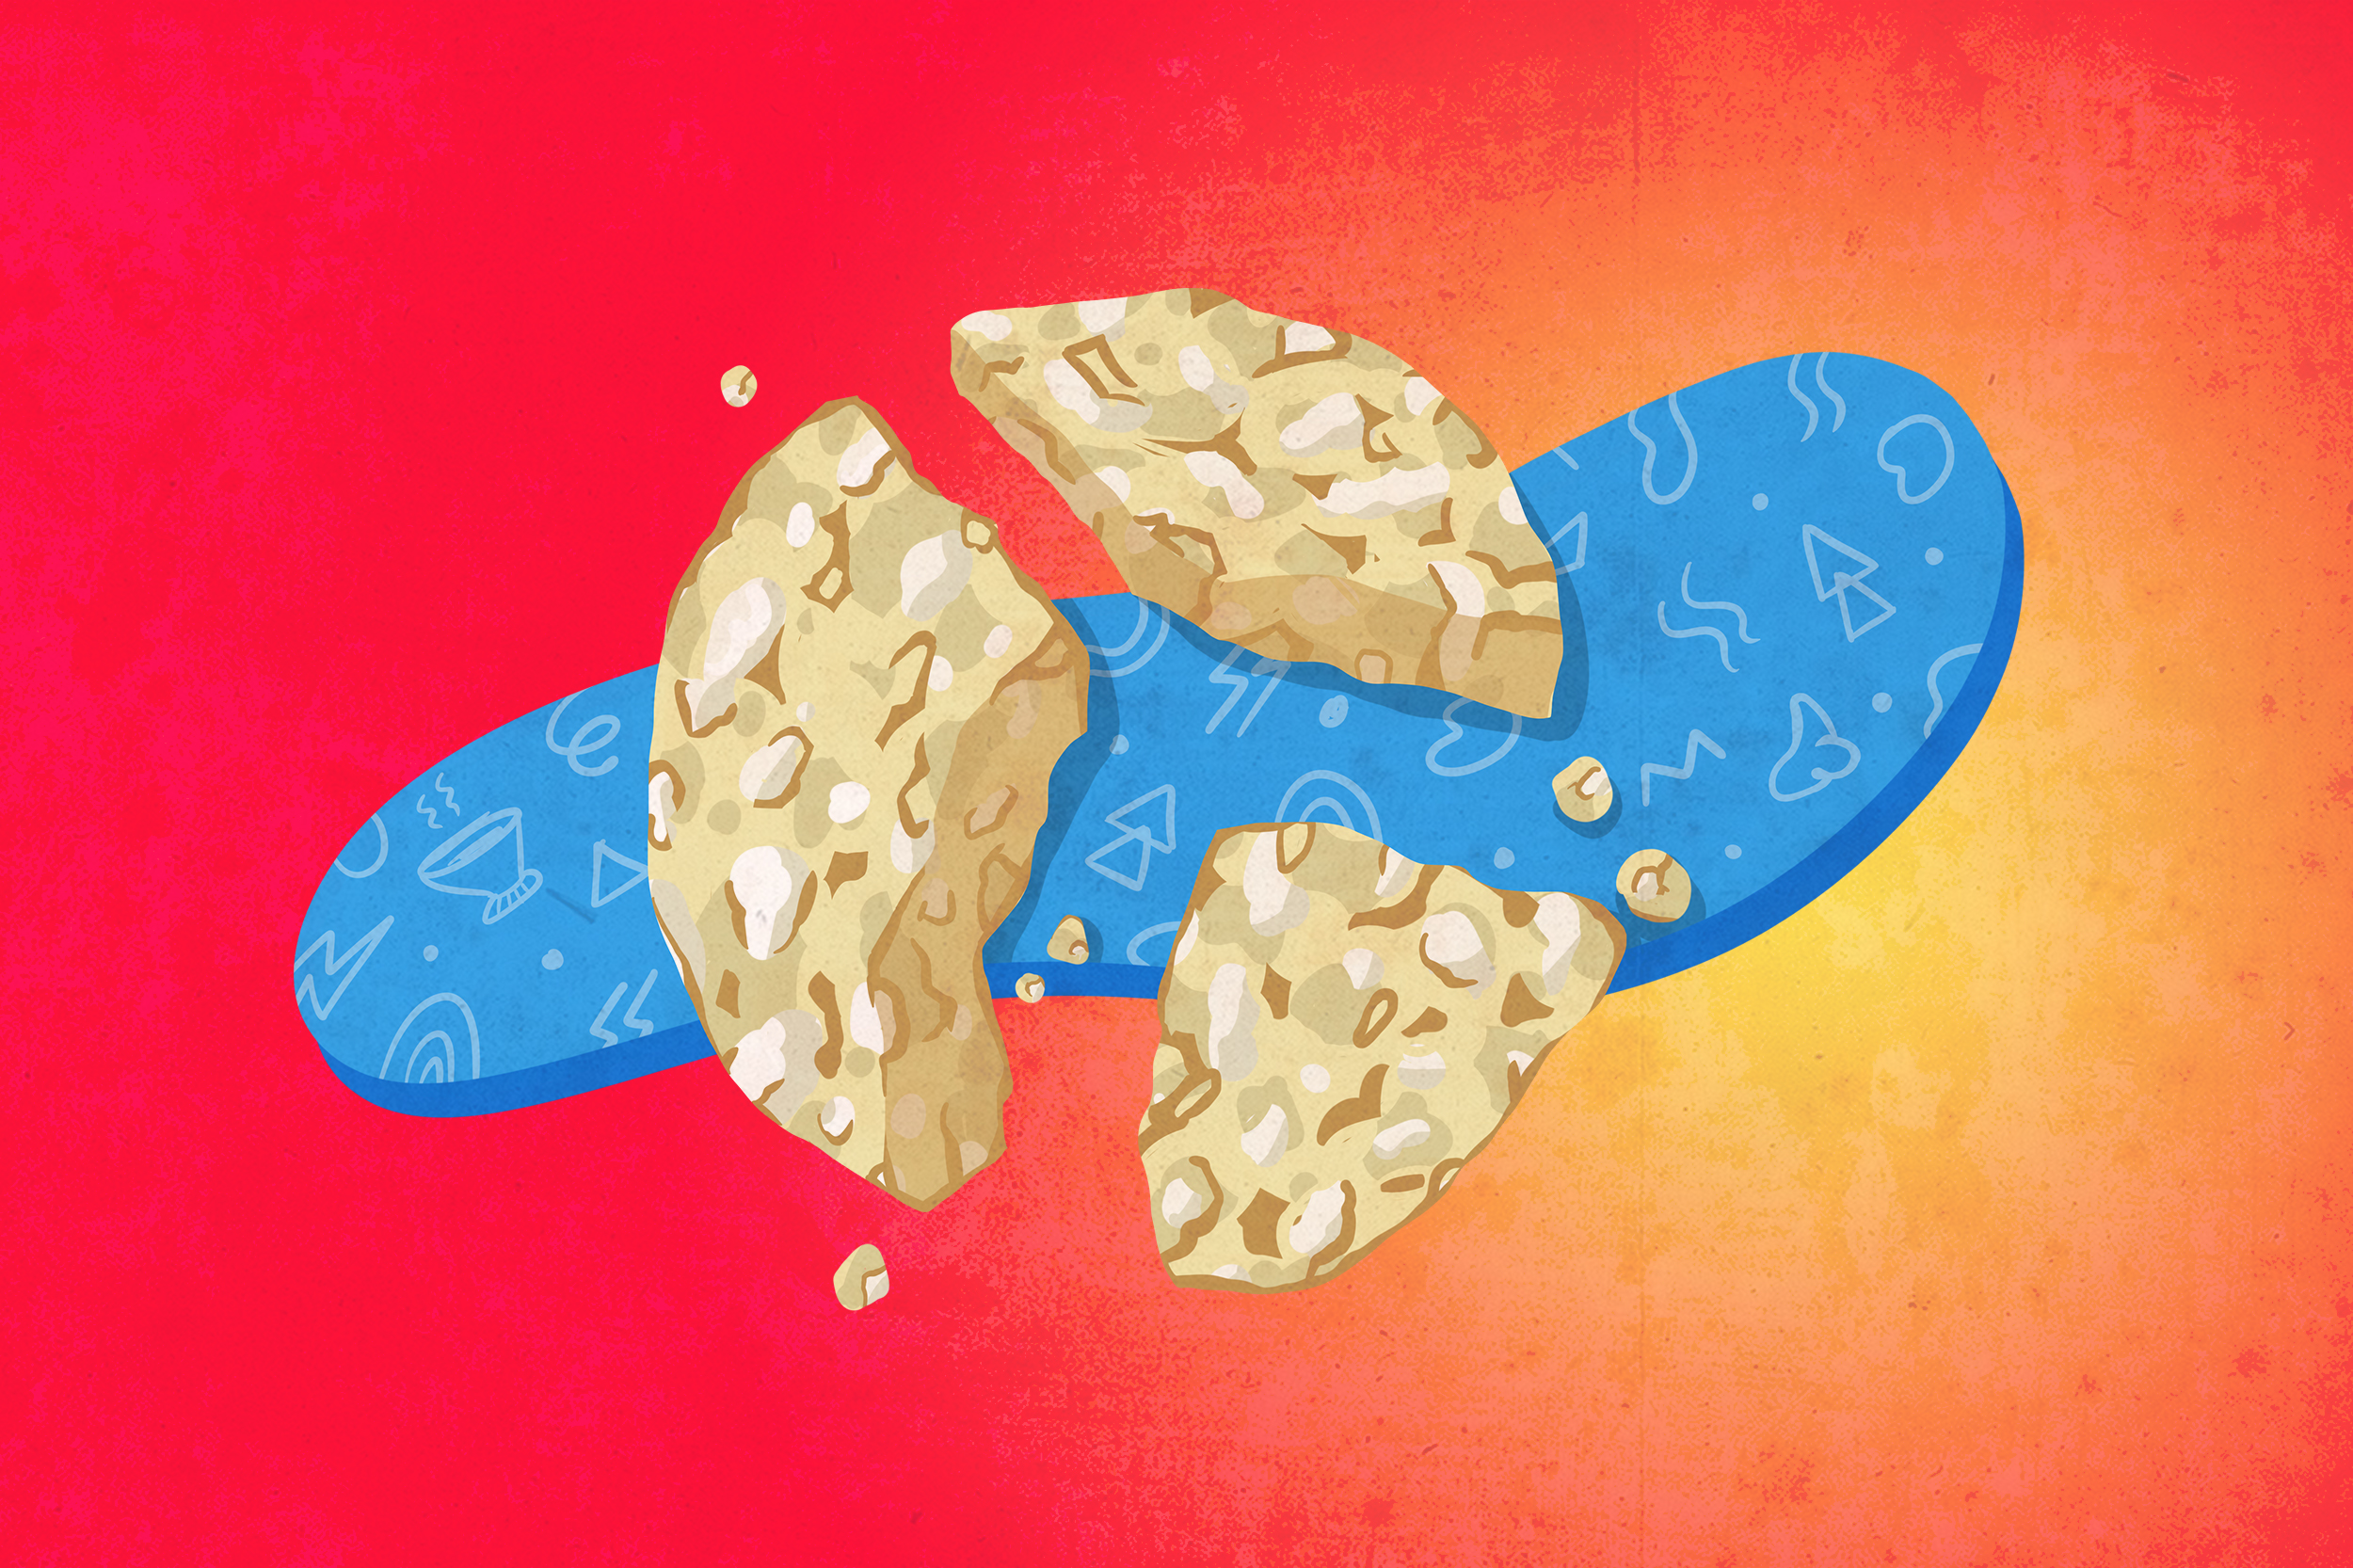 An illustration of a rice cake broken into three parts on a red and blue geometric background.